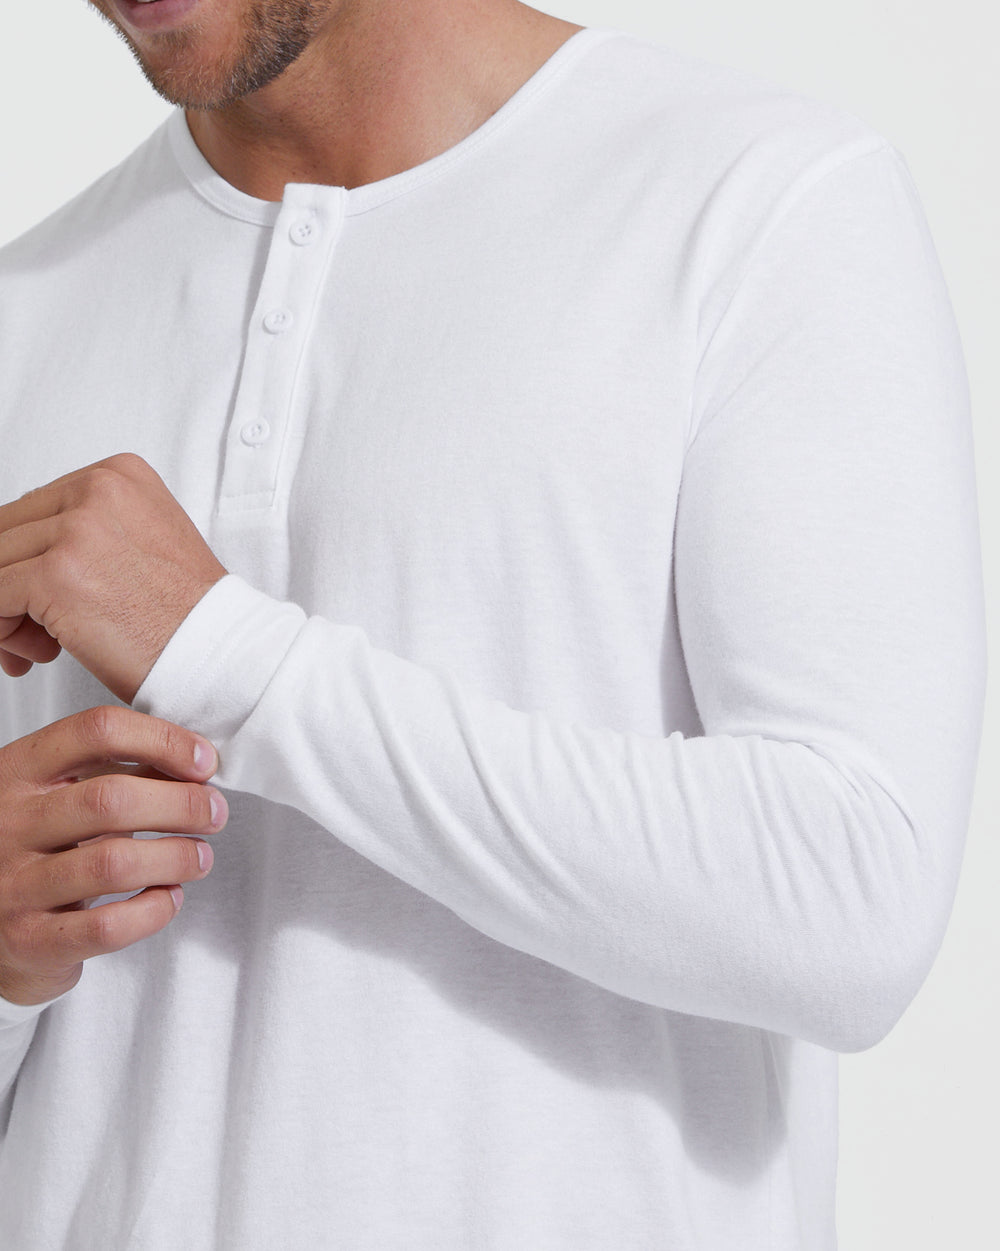 True Classic Long Sleeve Henley Shirt for Men, Premium Fitted Crew